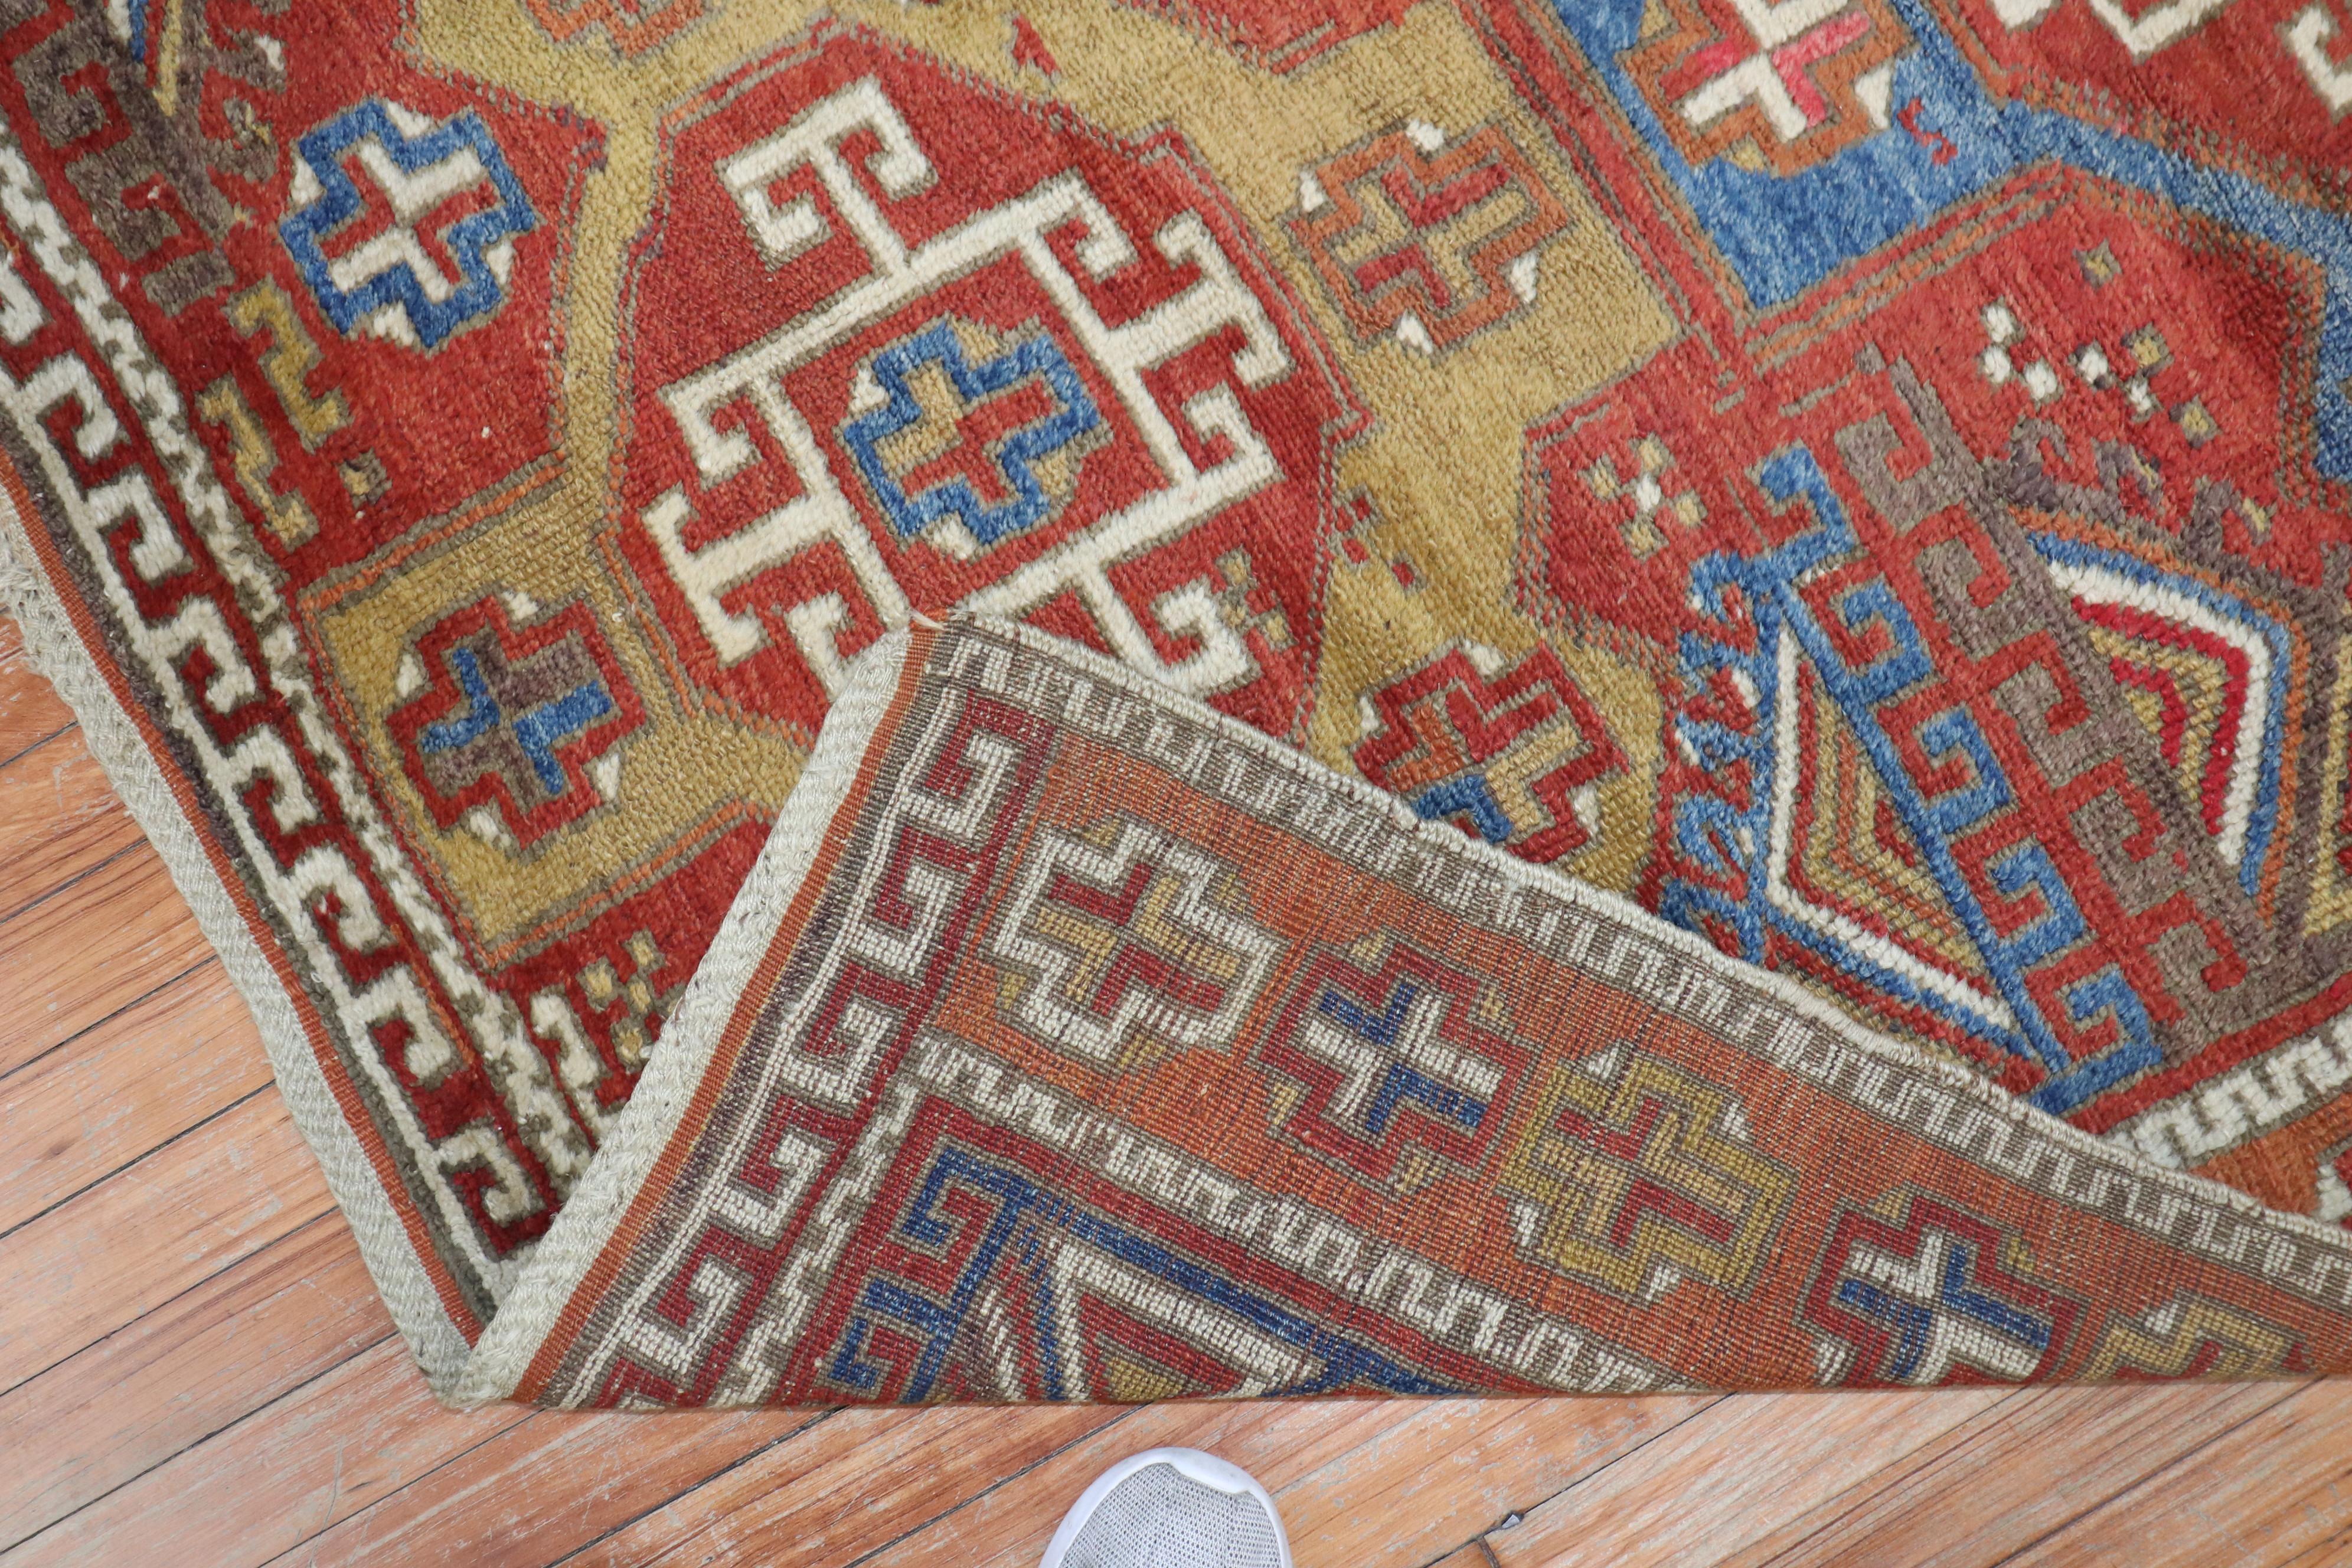 Late 19th century restored Turkish Bergama rug. The field is coral, the border is orange, dominant accents in blue and brown, circa 1880

Measures: 4'6